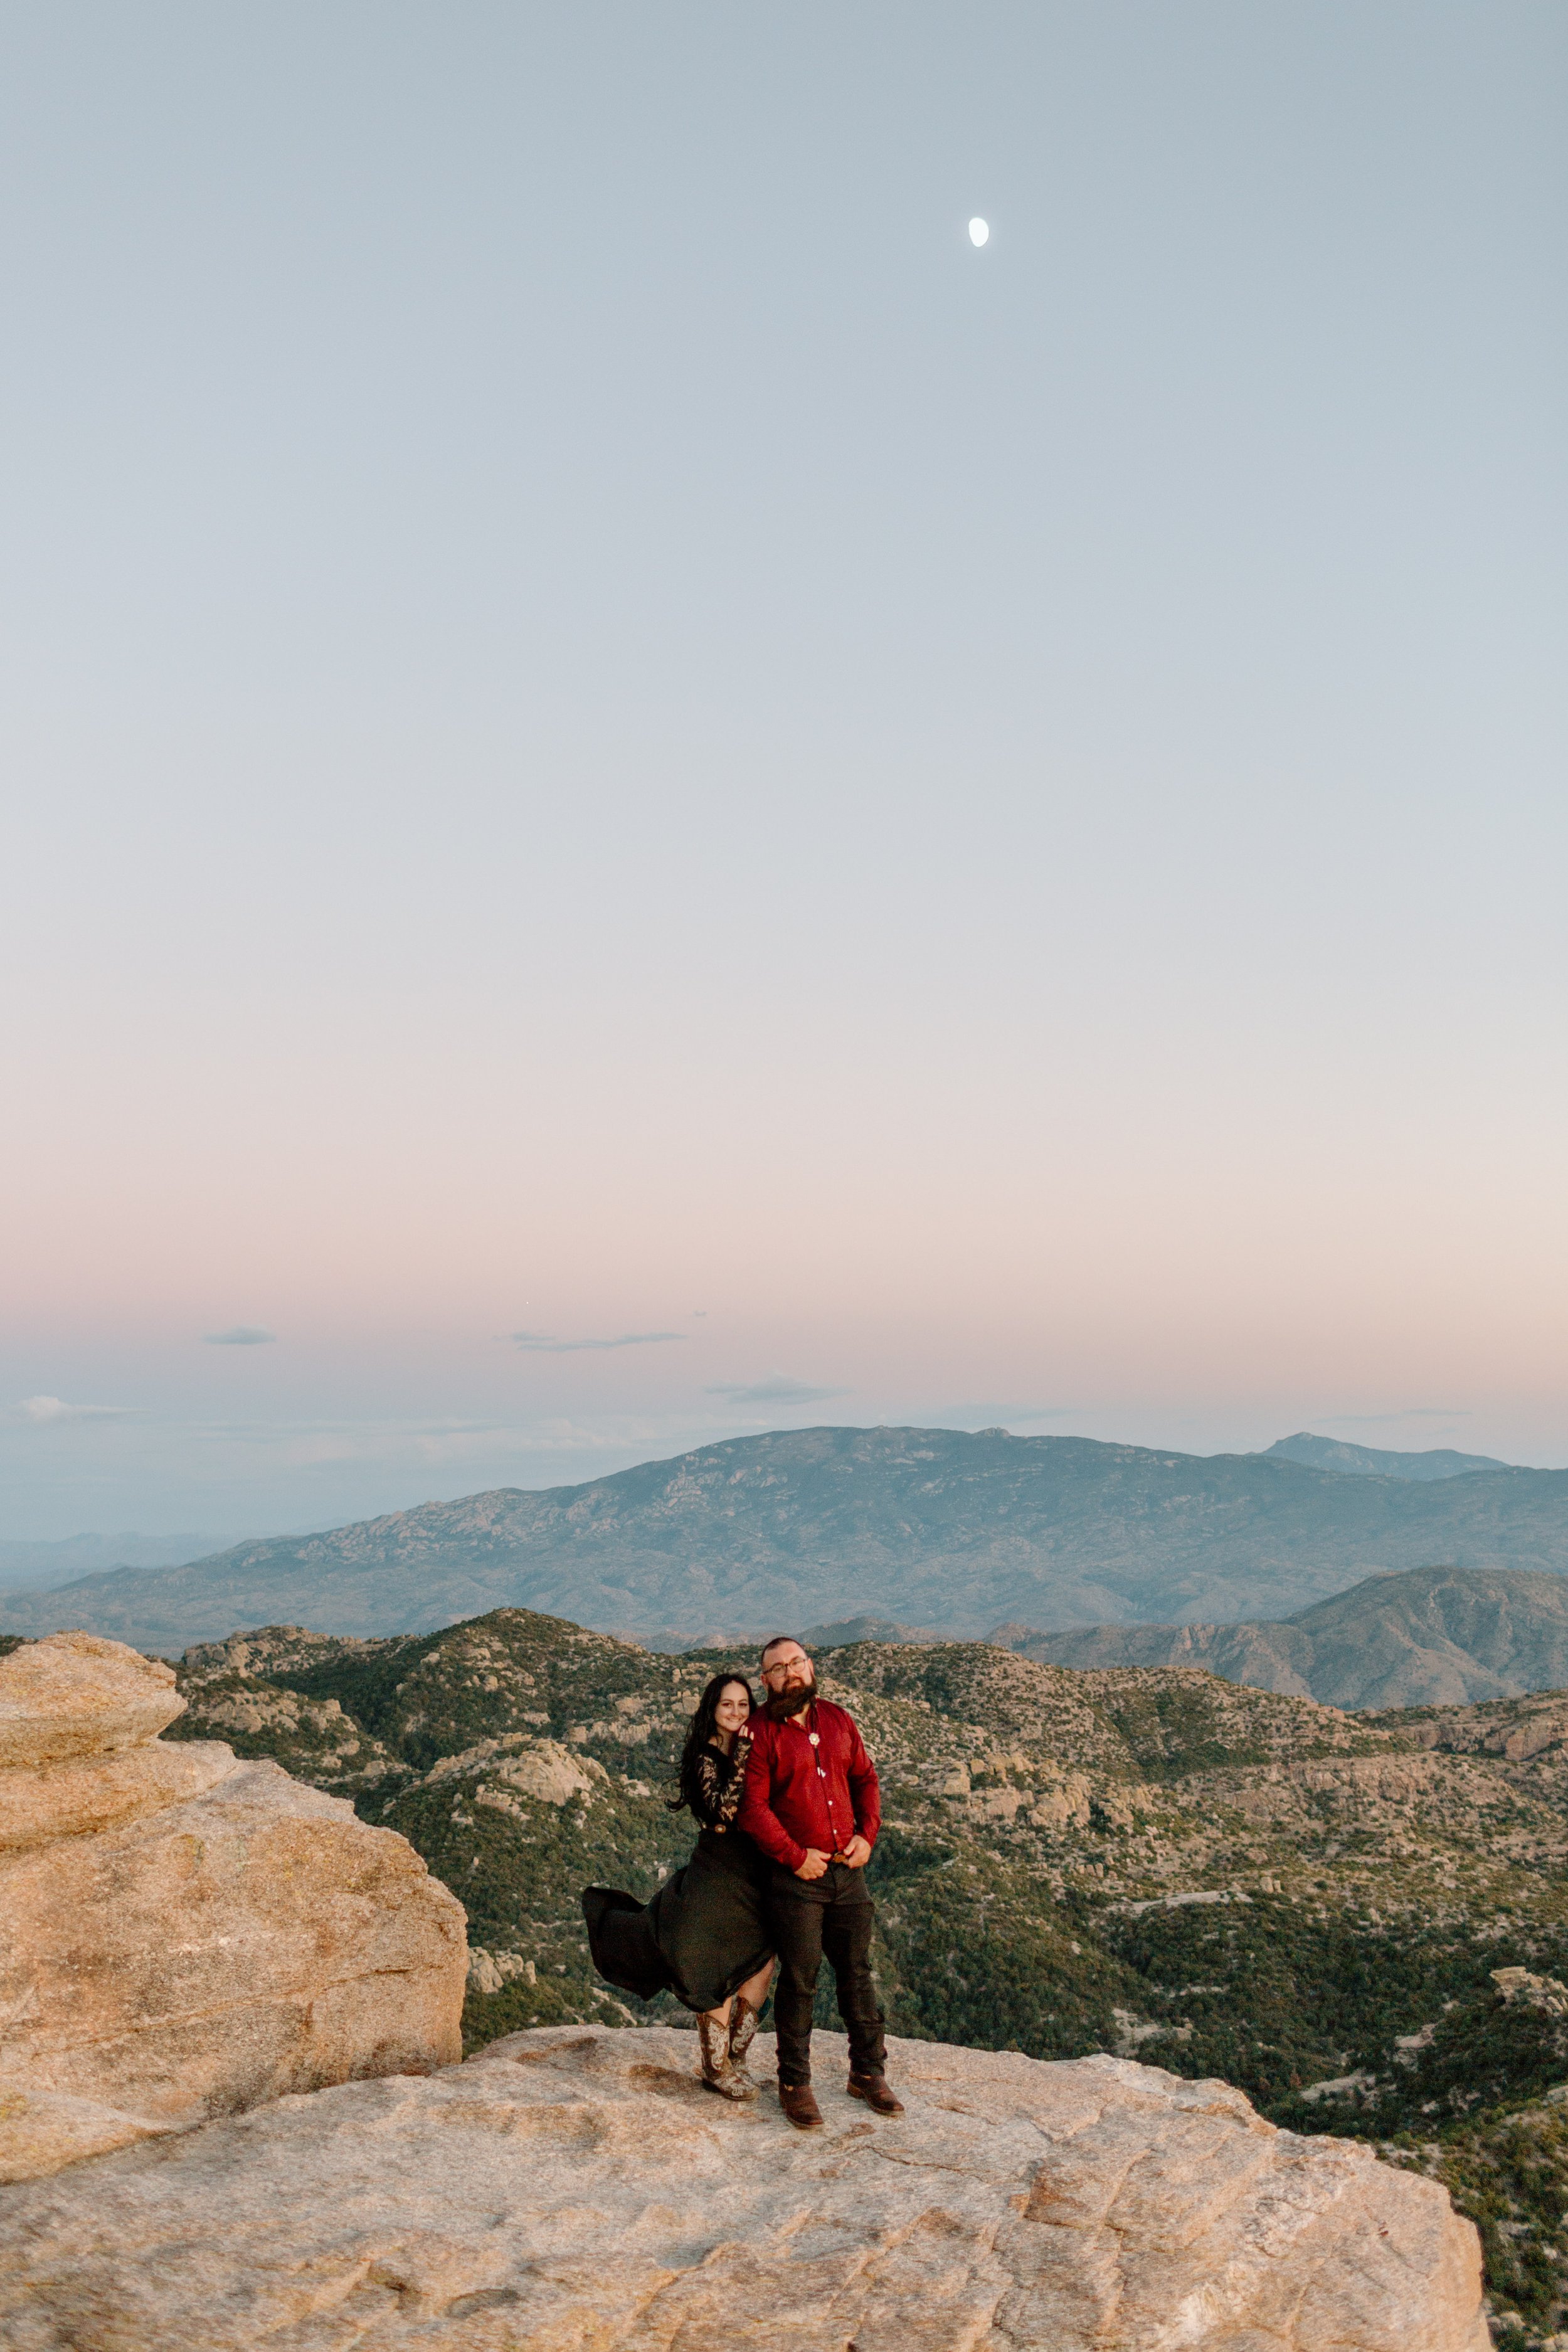  wide shot of mountains with couple smiling for the camera with wind blowing the woman’s dress 